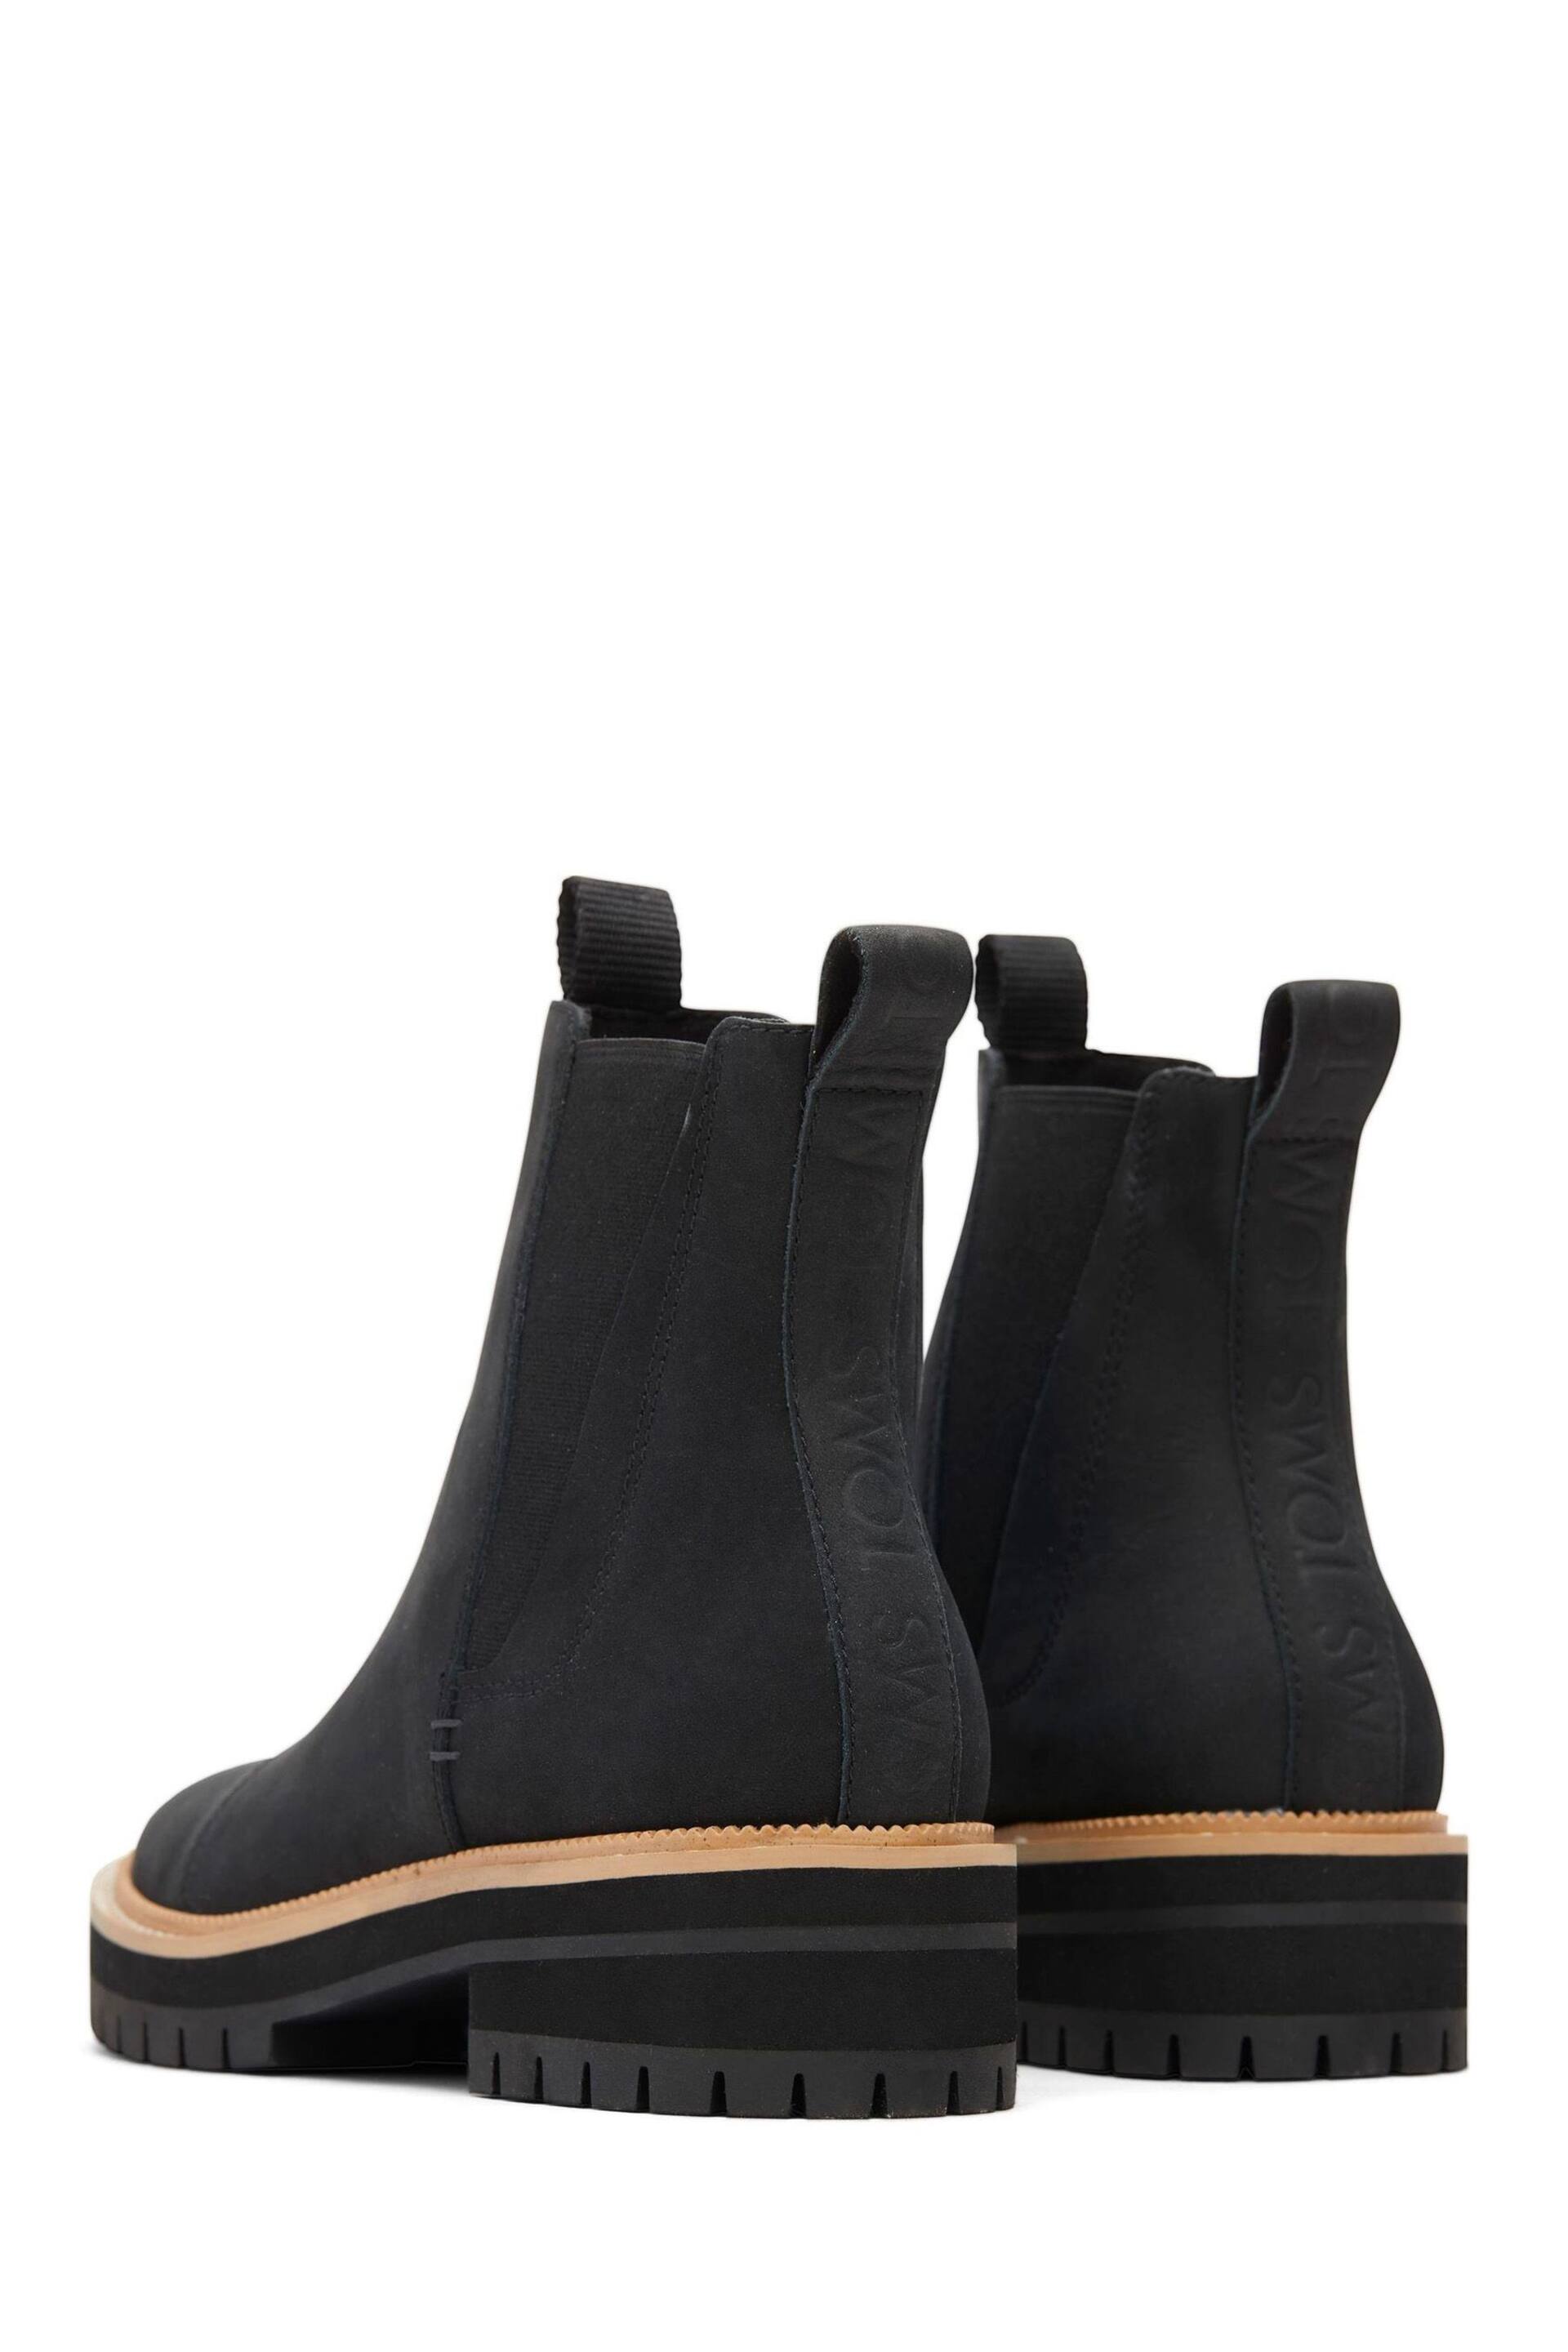 TOMS Dakota Water Resistant Leather with Faux Fur Boots - Image 5 of 7